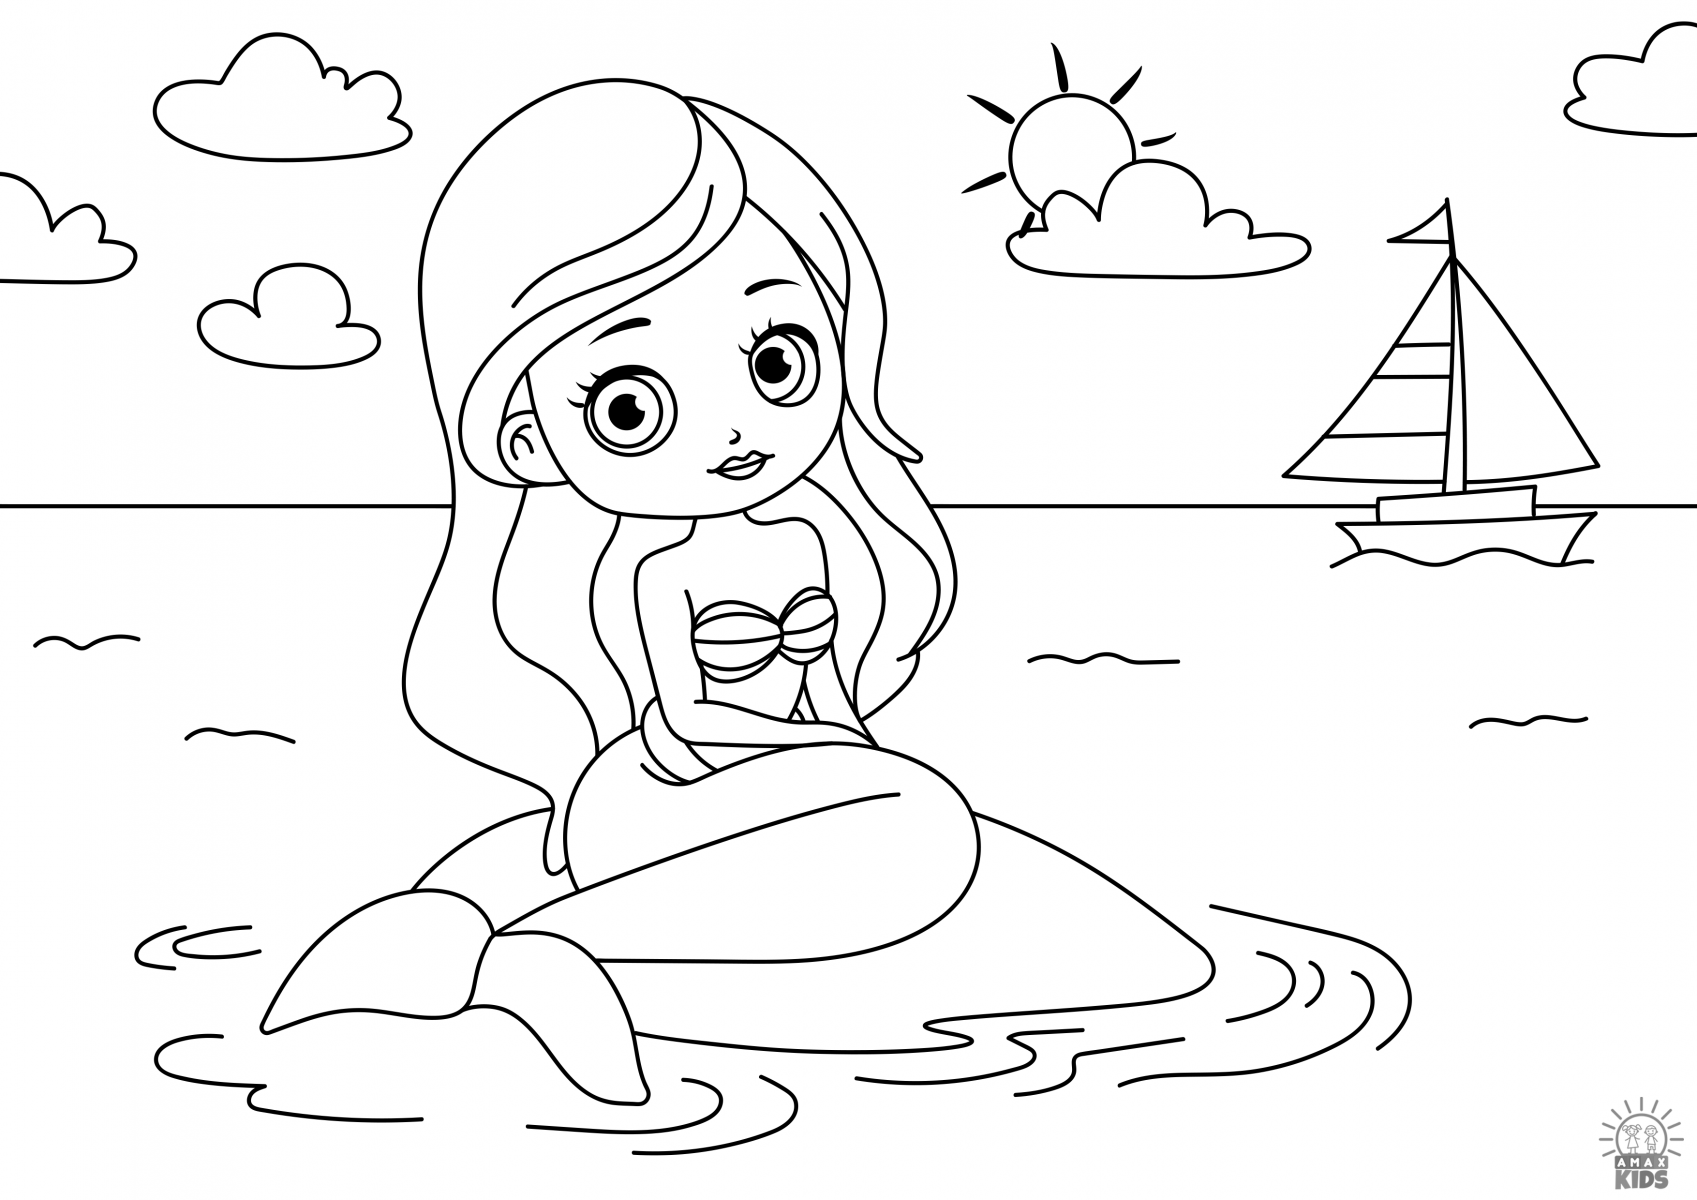 Printable coloring pages for girls   Amax Kids